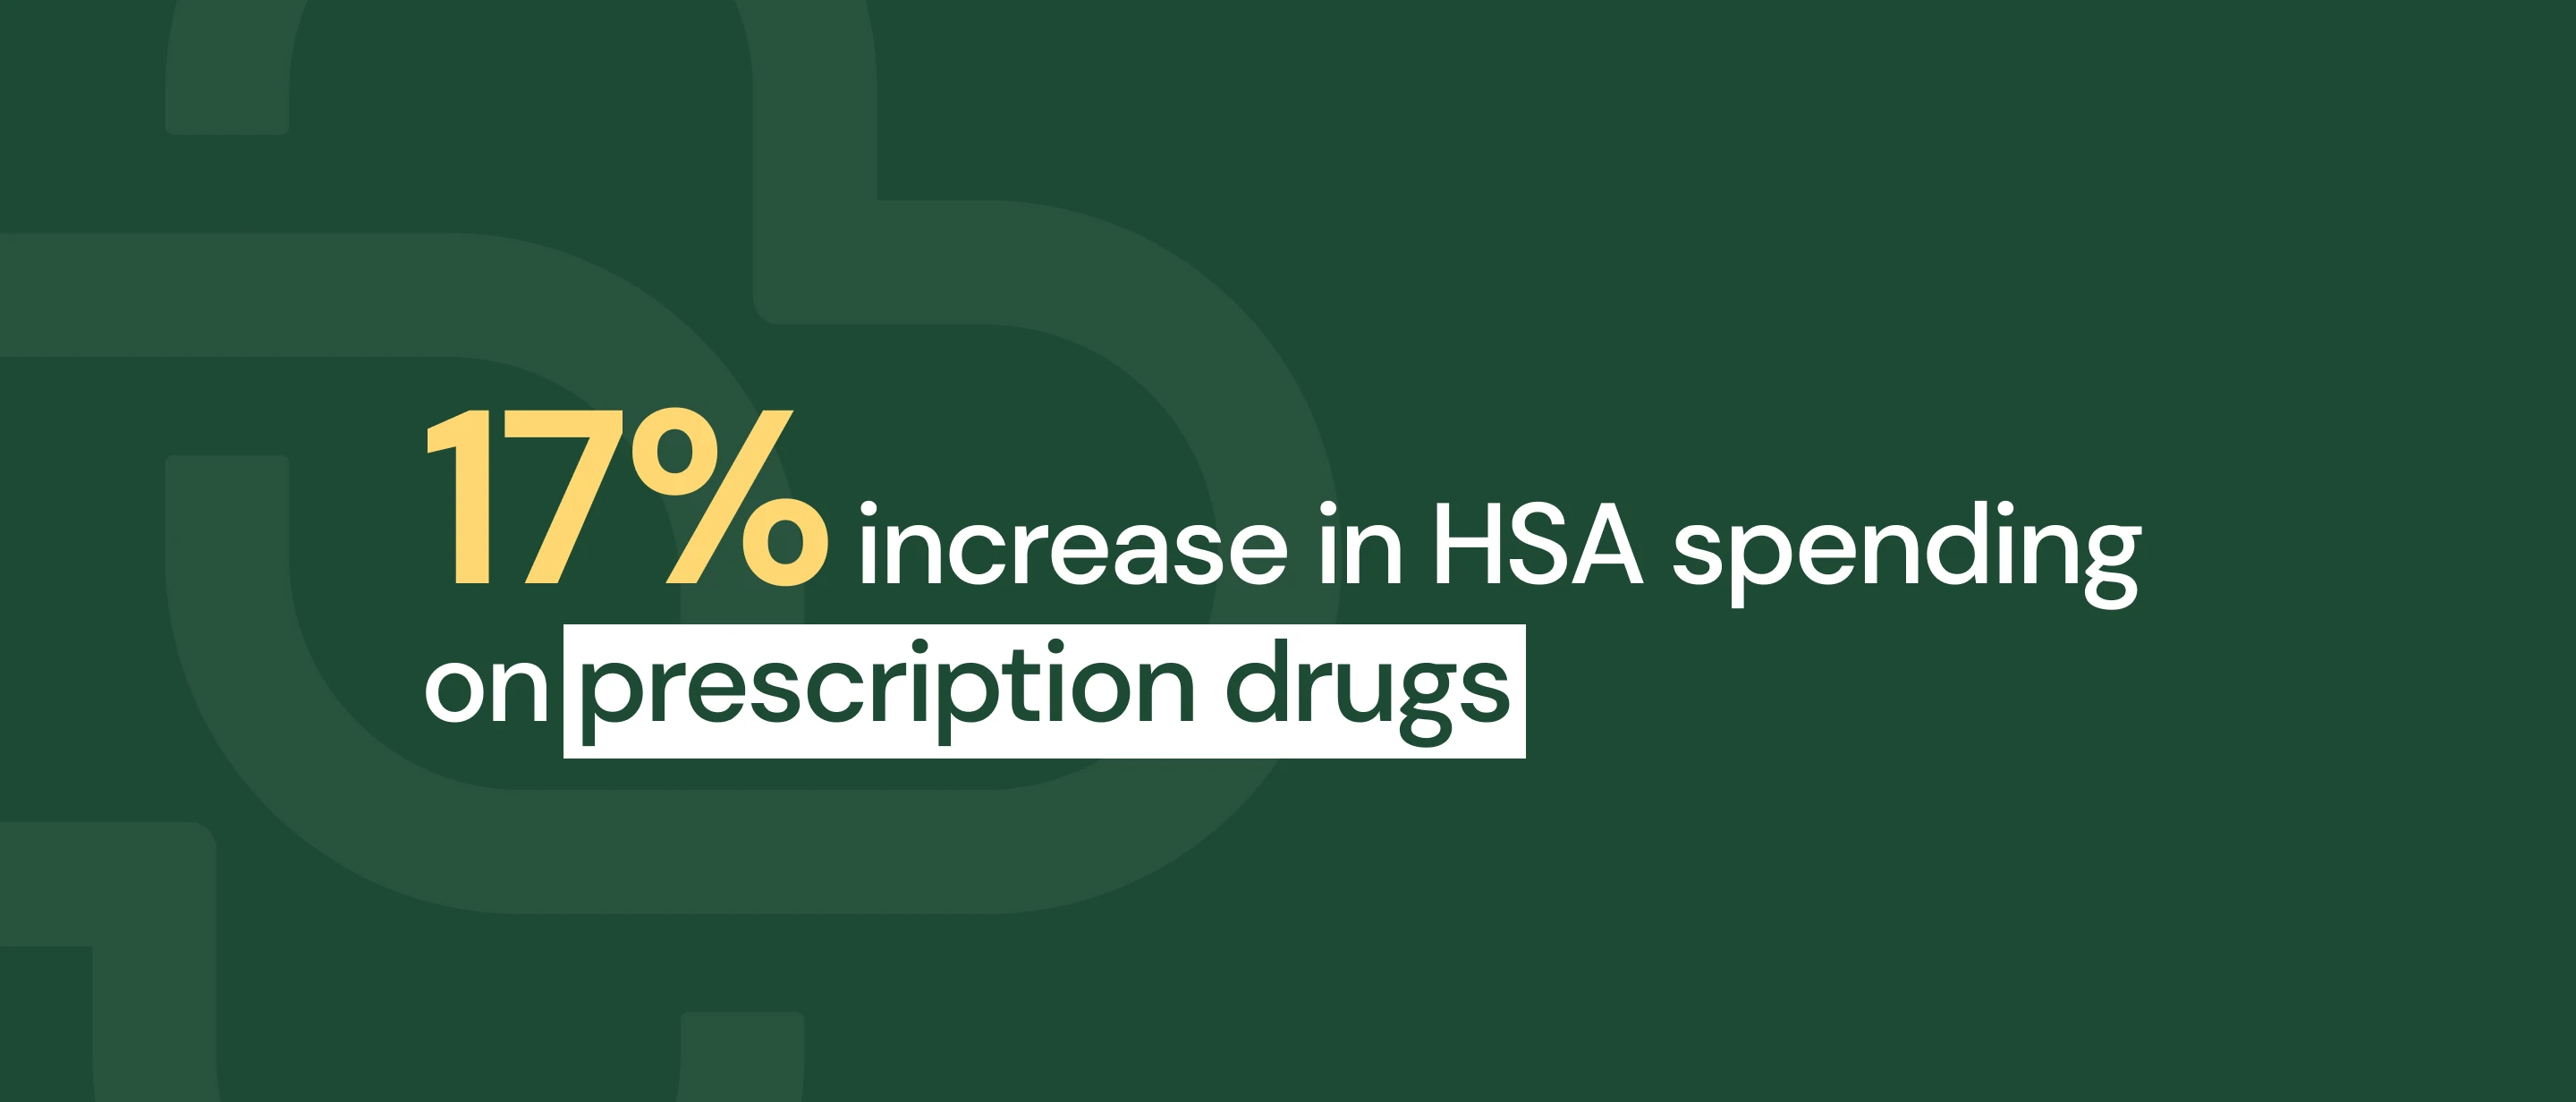 HSA Snapsnot Report Images - In Line - 17% Increase